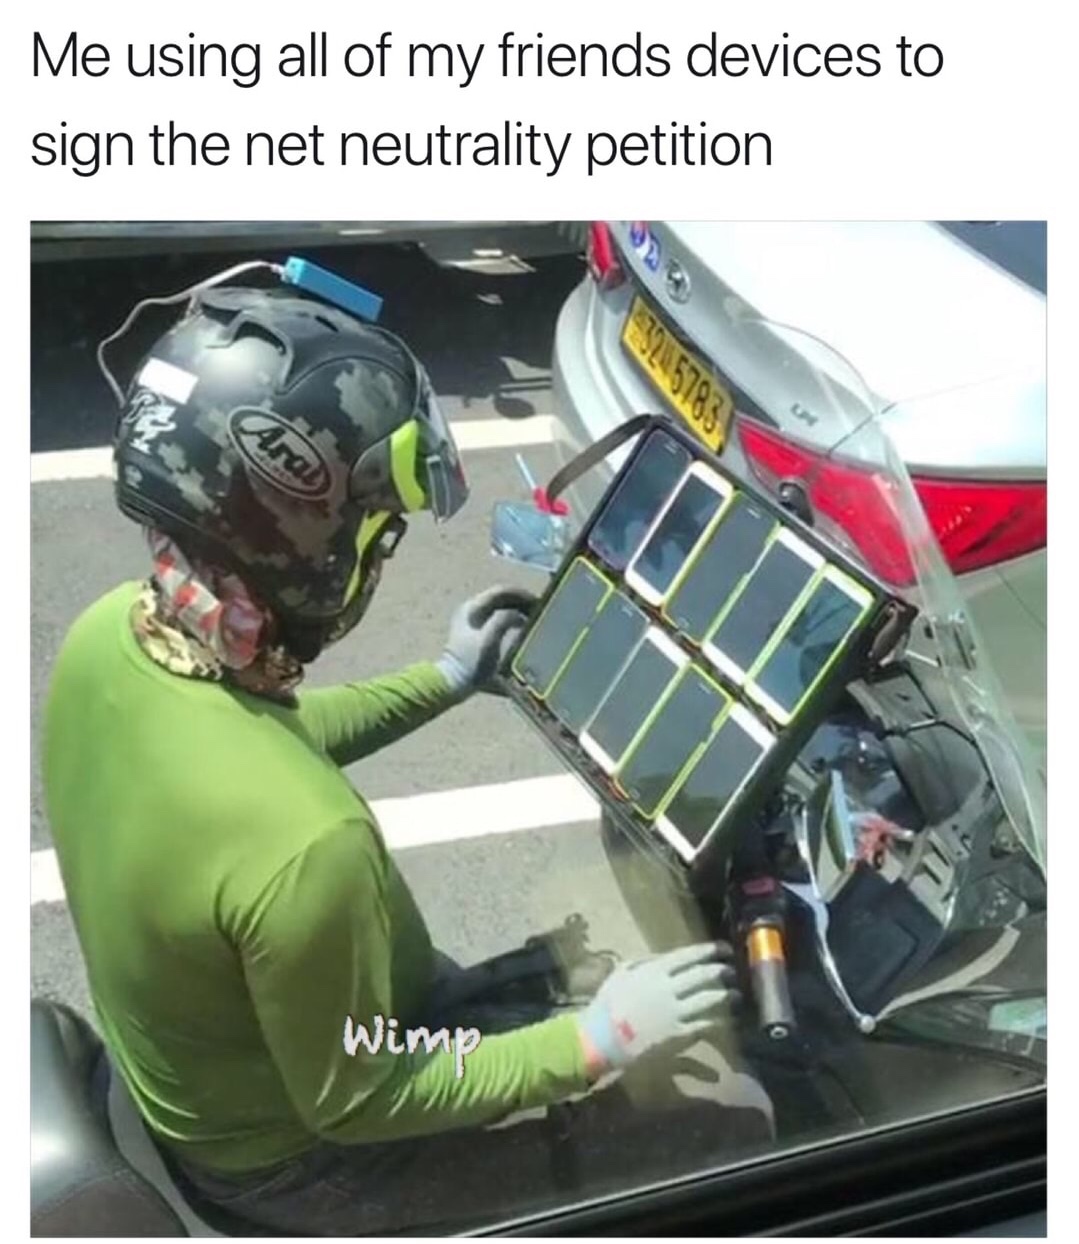 vehicle - Me using all of my friends devices to sign the net neutrality petition Wimp